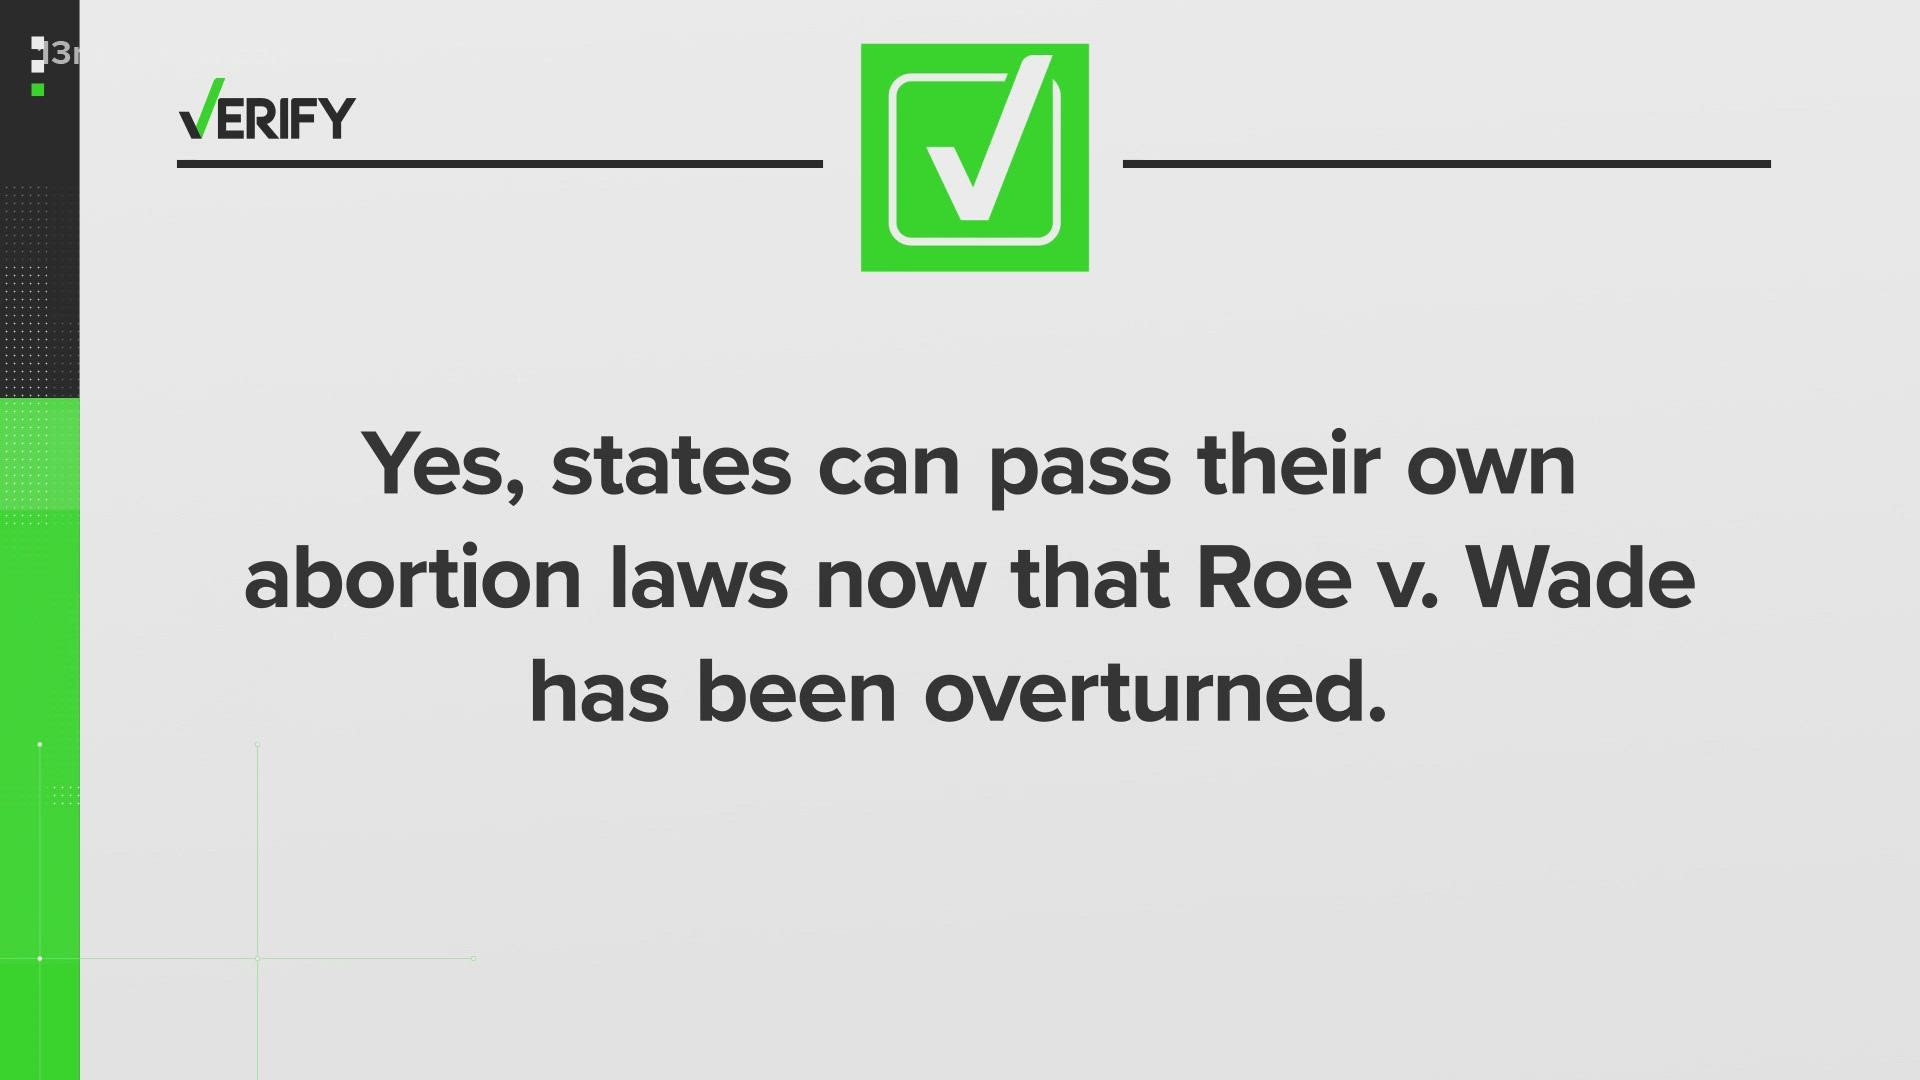 Some states previously passed laws banning or restricting access to abortions. Those laws are now set to go into effect.